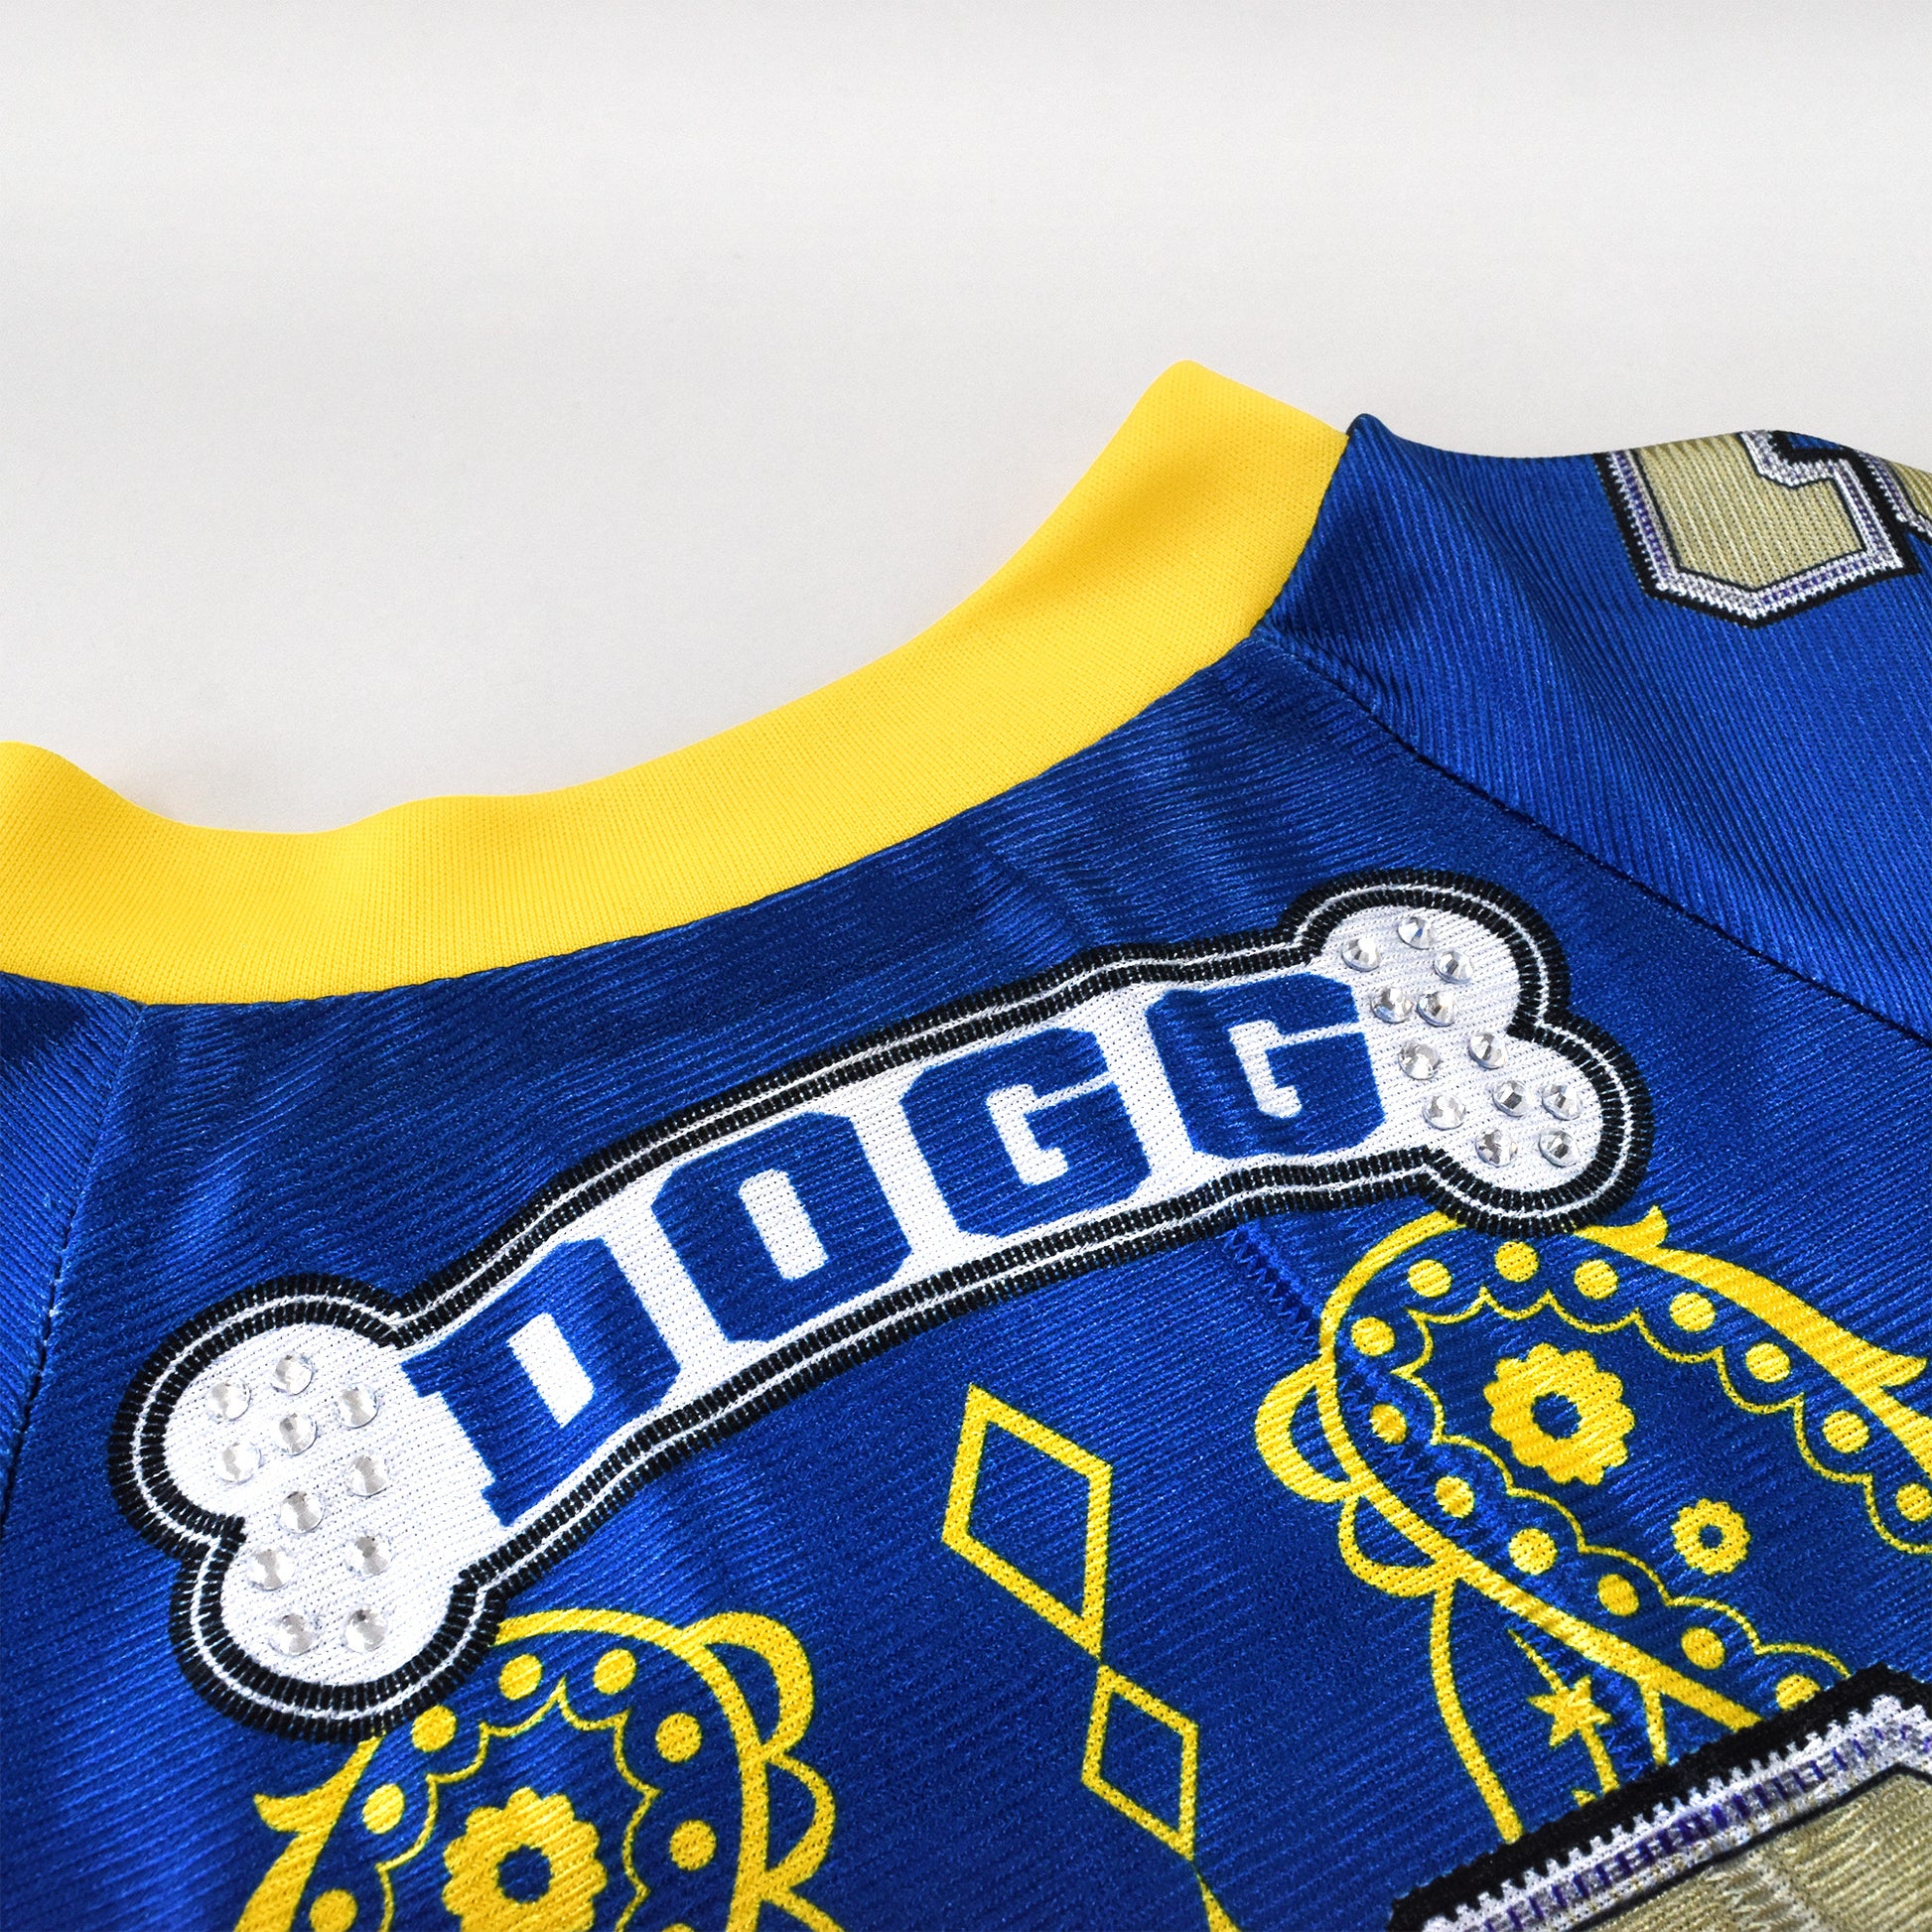 A close up detail image showing design sublimation and sparkle detail of the Halftime Deluxe Pet Jersey.